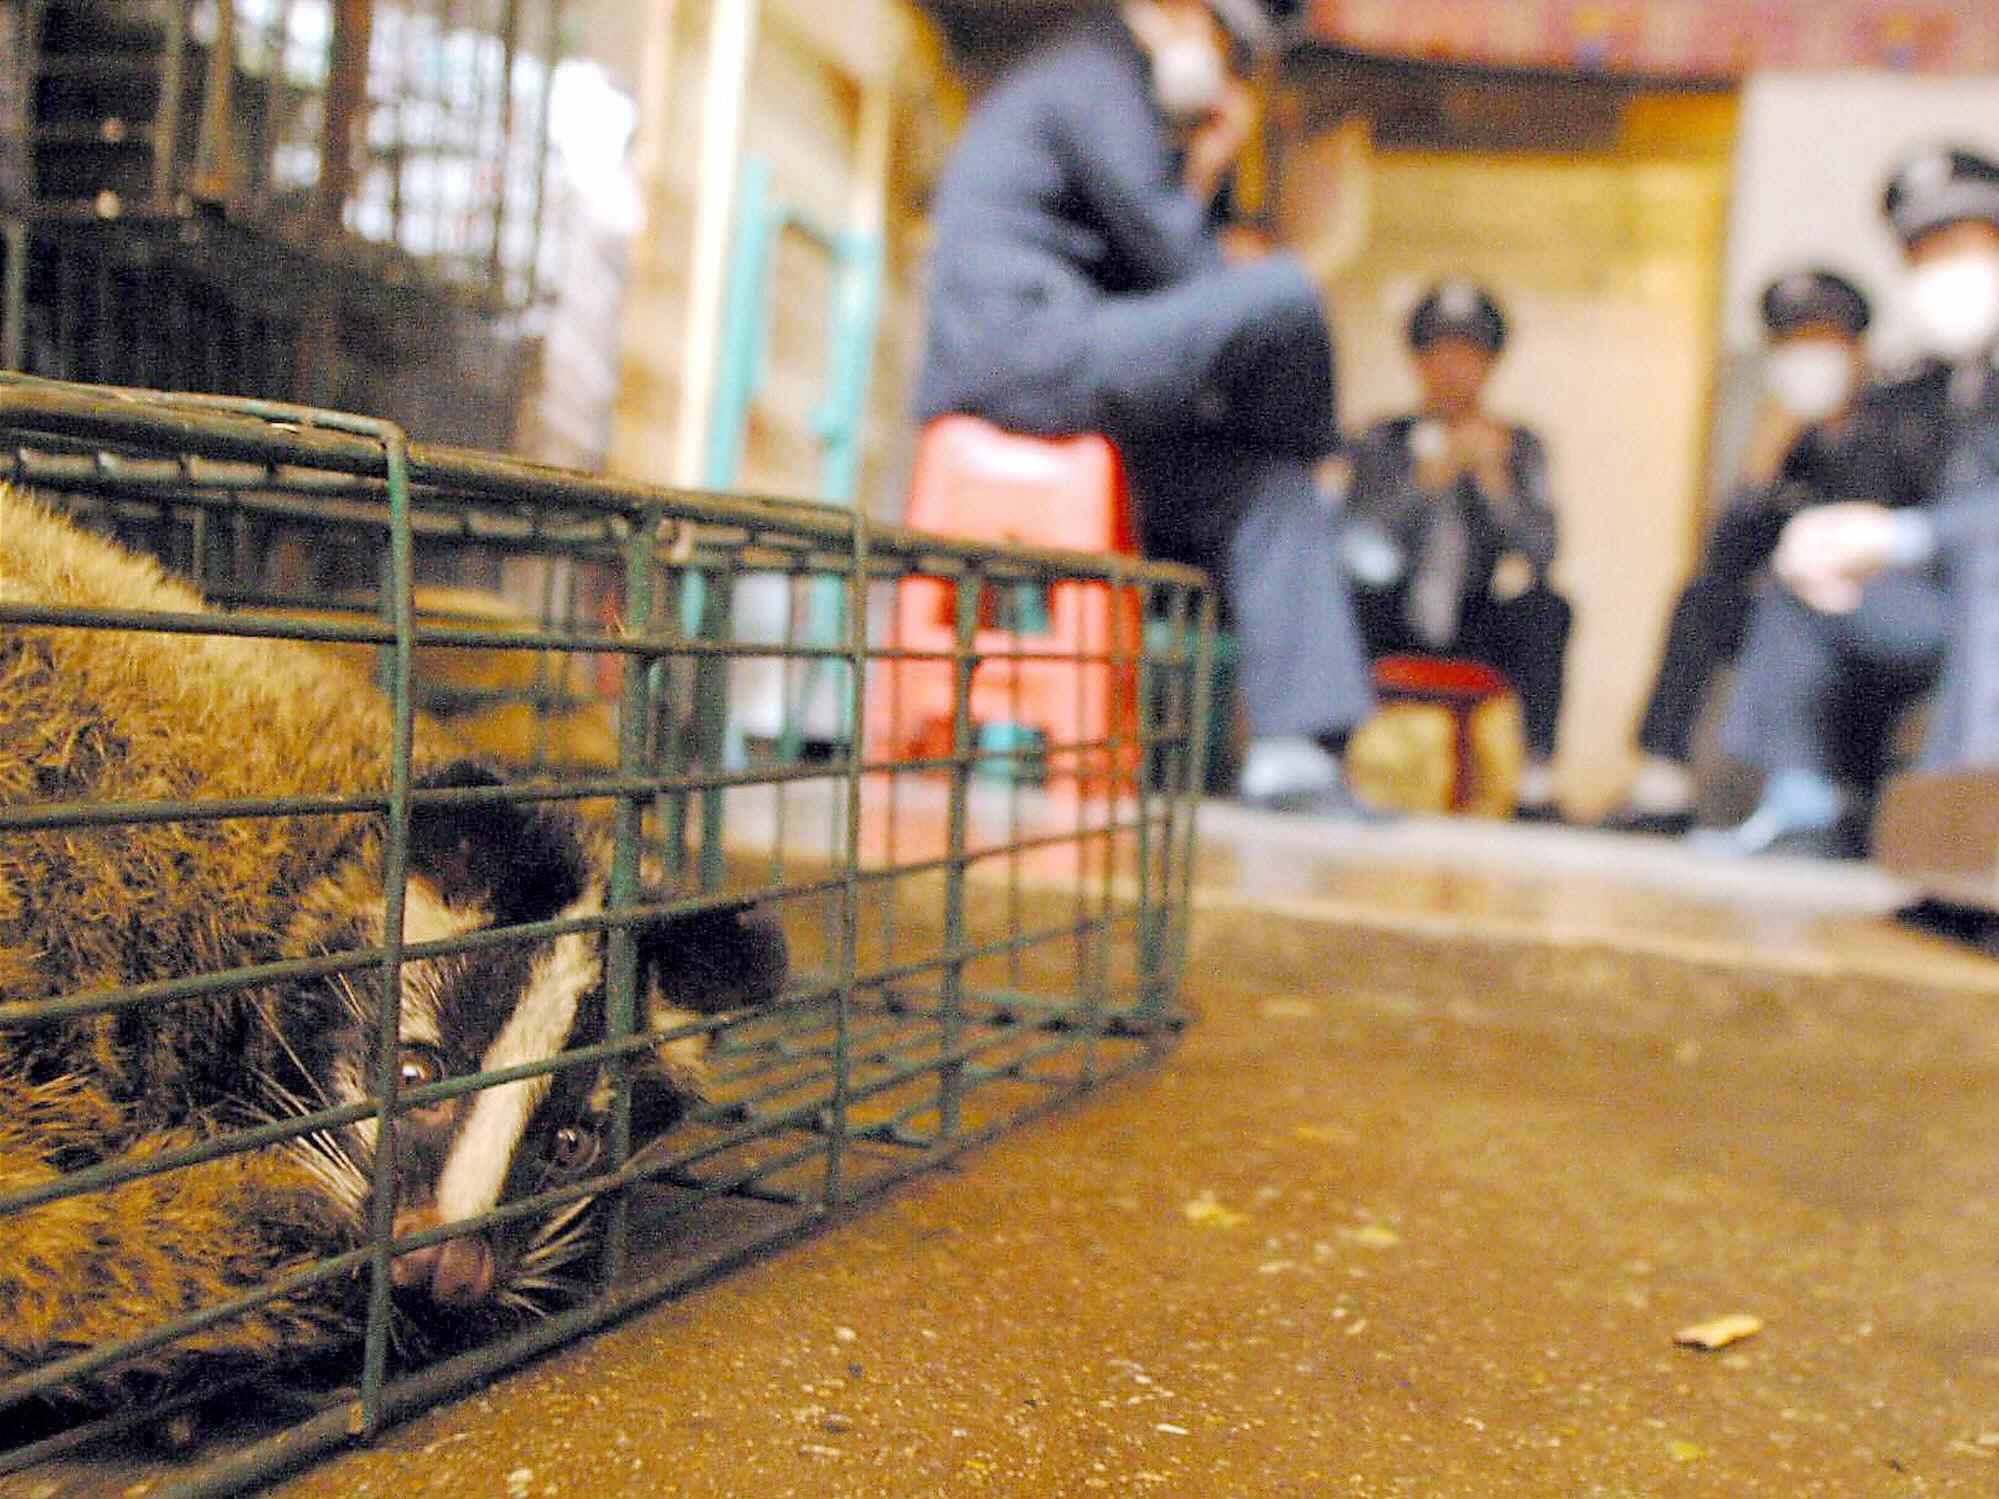 Health workers and police watch over civet cats, thought to have carried Sars from bats to humans, confiscated from a wildlife market in Guangzhou